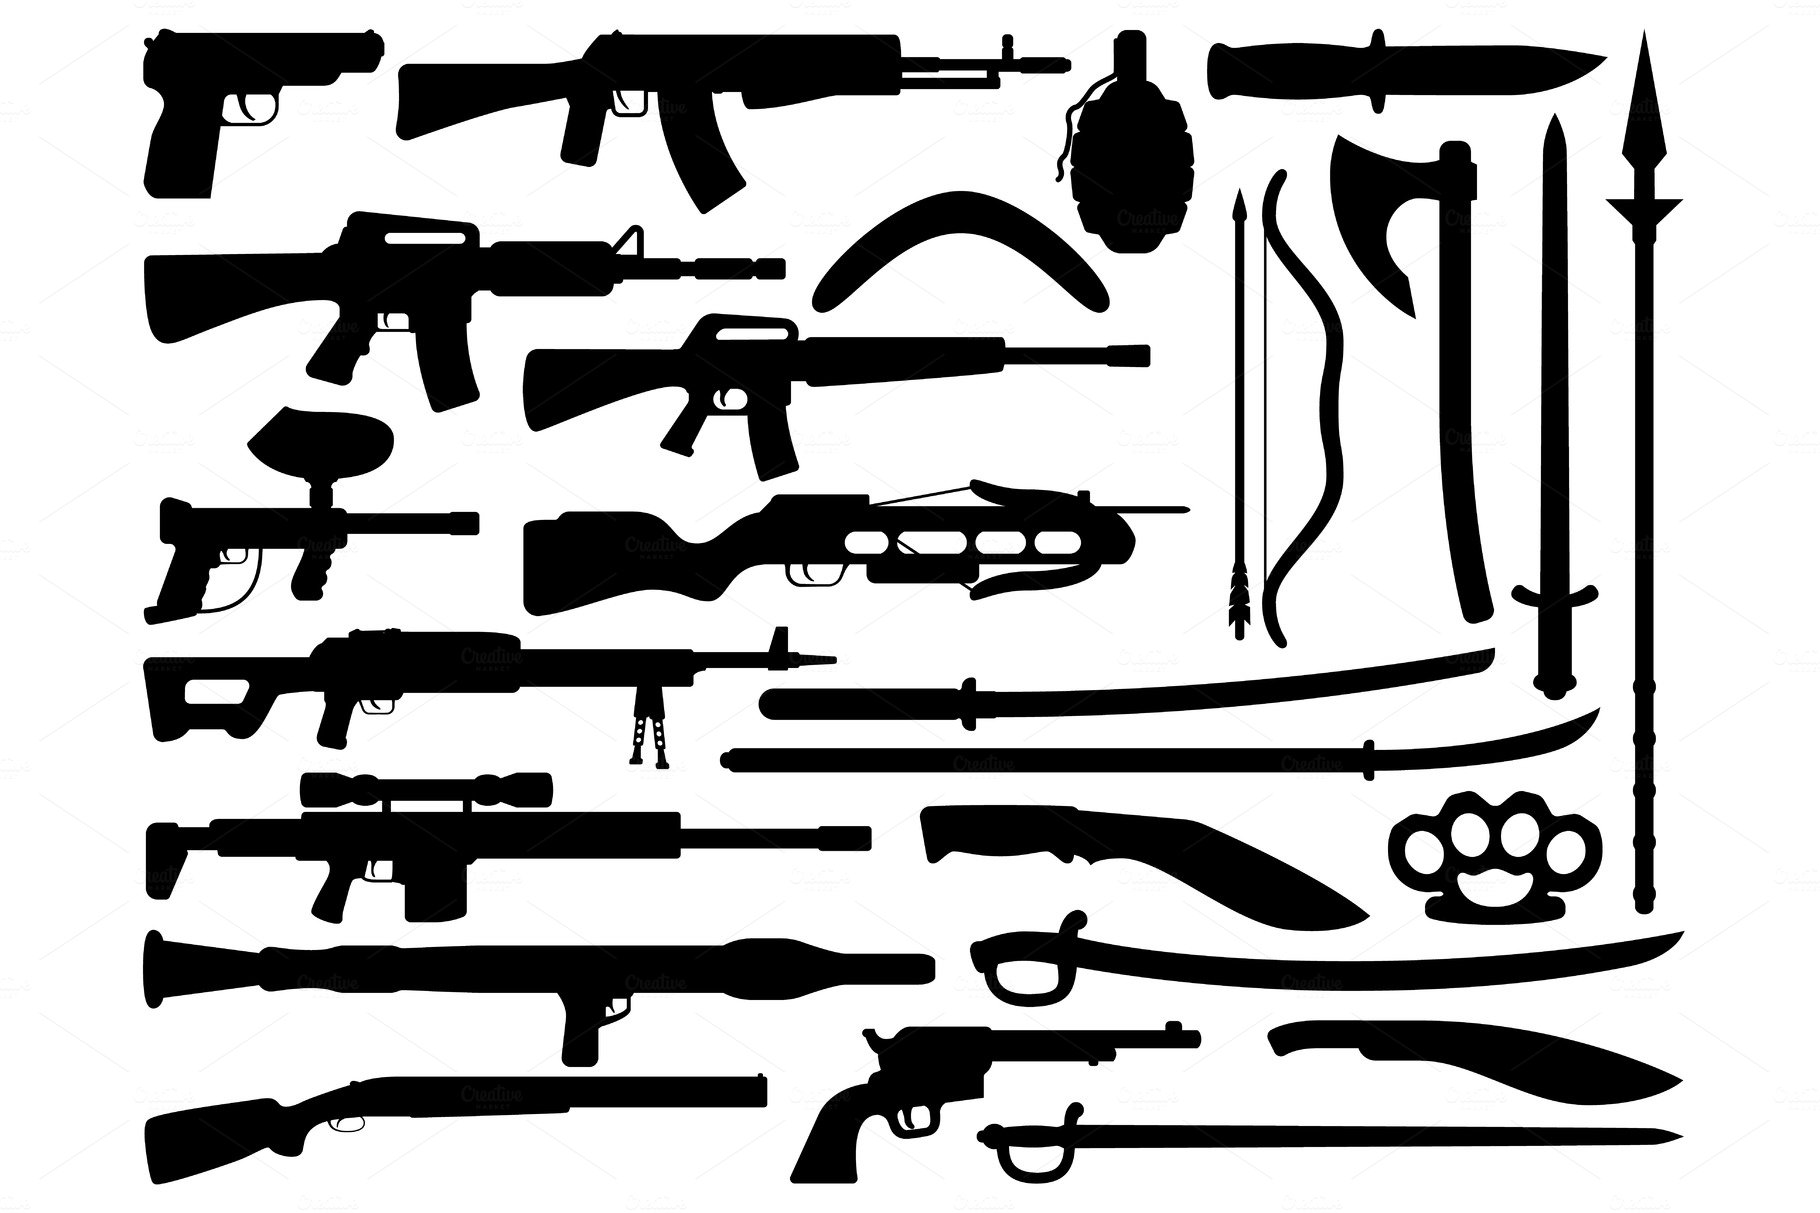 Weapon, gun, knife, rifle cover image.